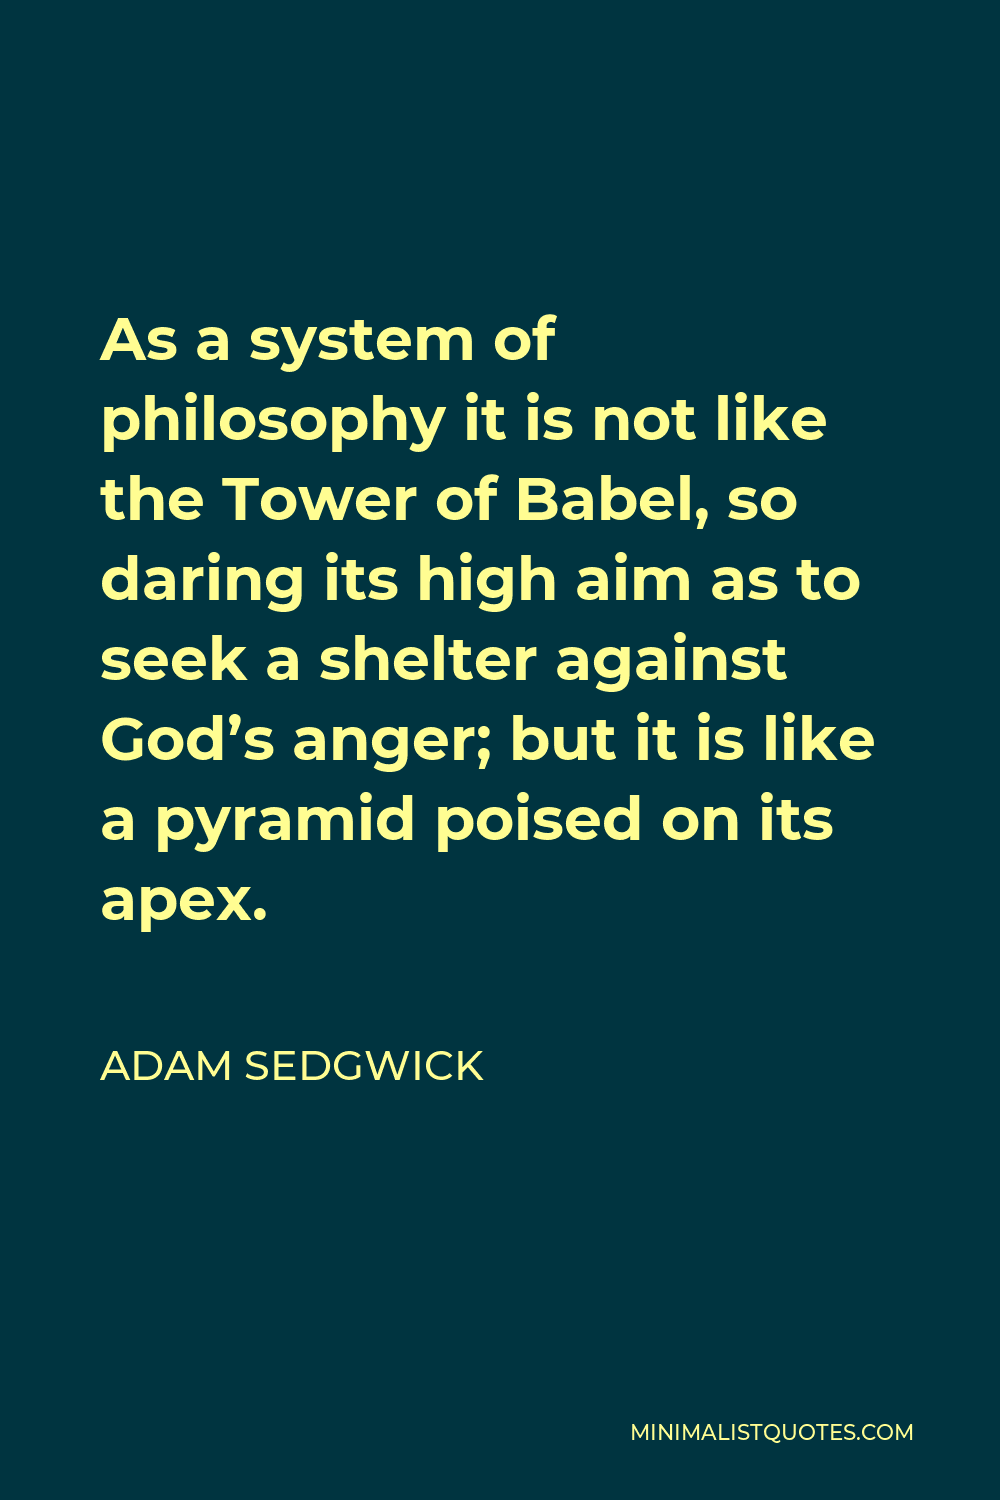 Adam Sedgwick Quote - As a system of philosophy it is not like the Tower of Babel, so daring its high aim as to seek a shelter against God’s anger; but it is like a pyramid poised on its apex.